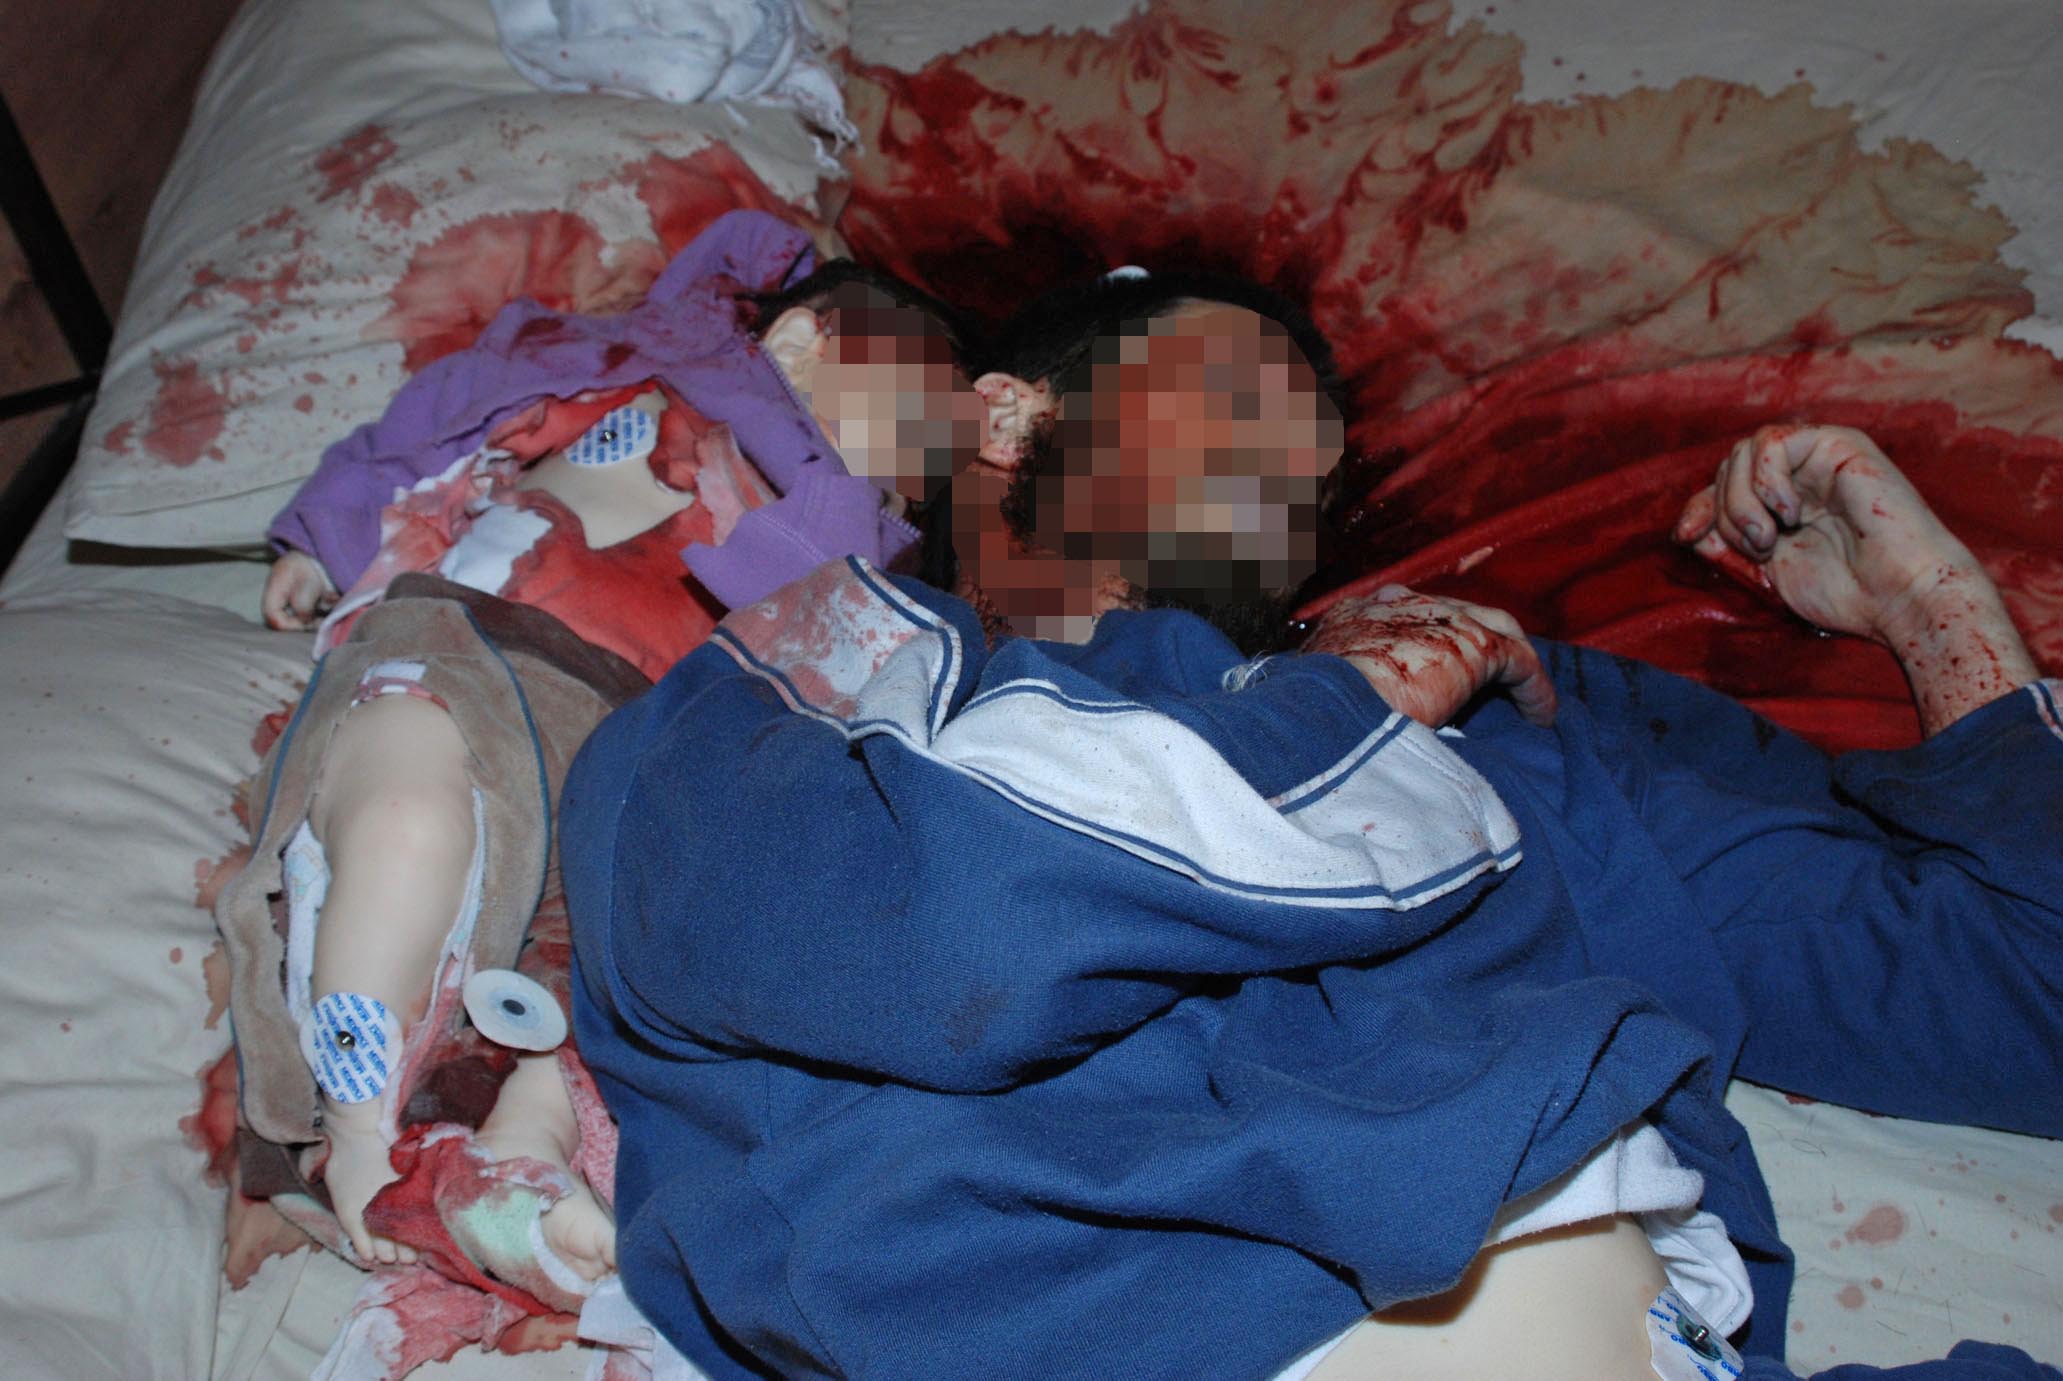 Graphic Murder Scene Photos Pictures of brutal murders of